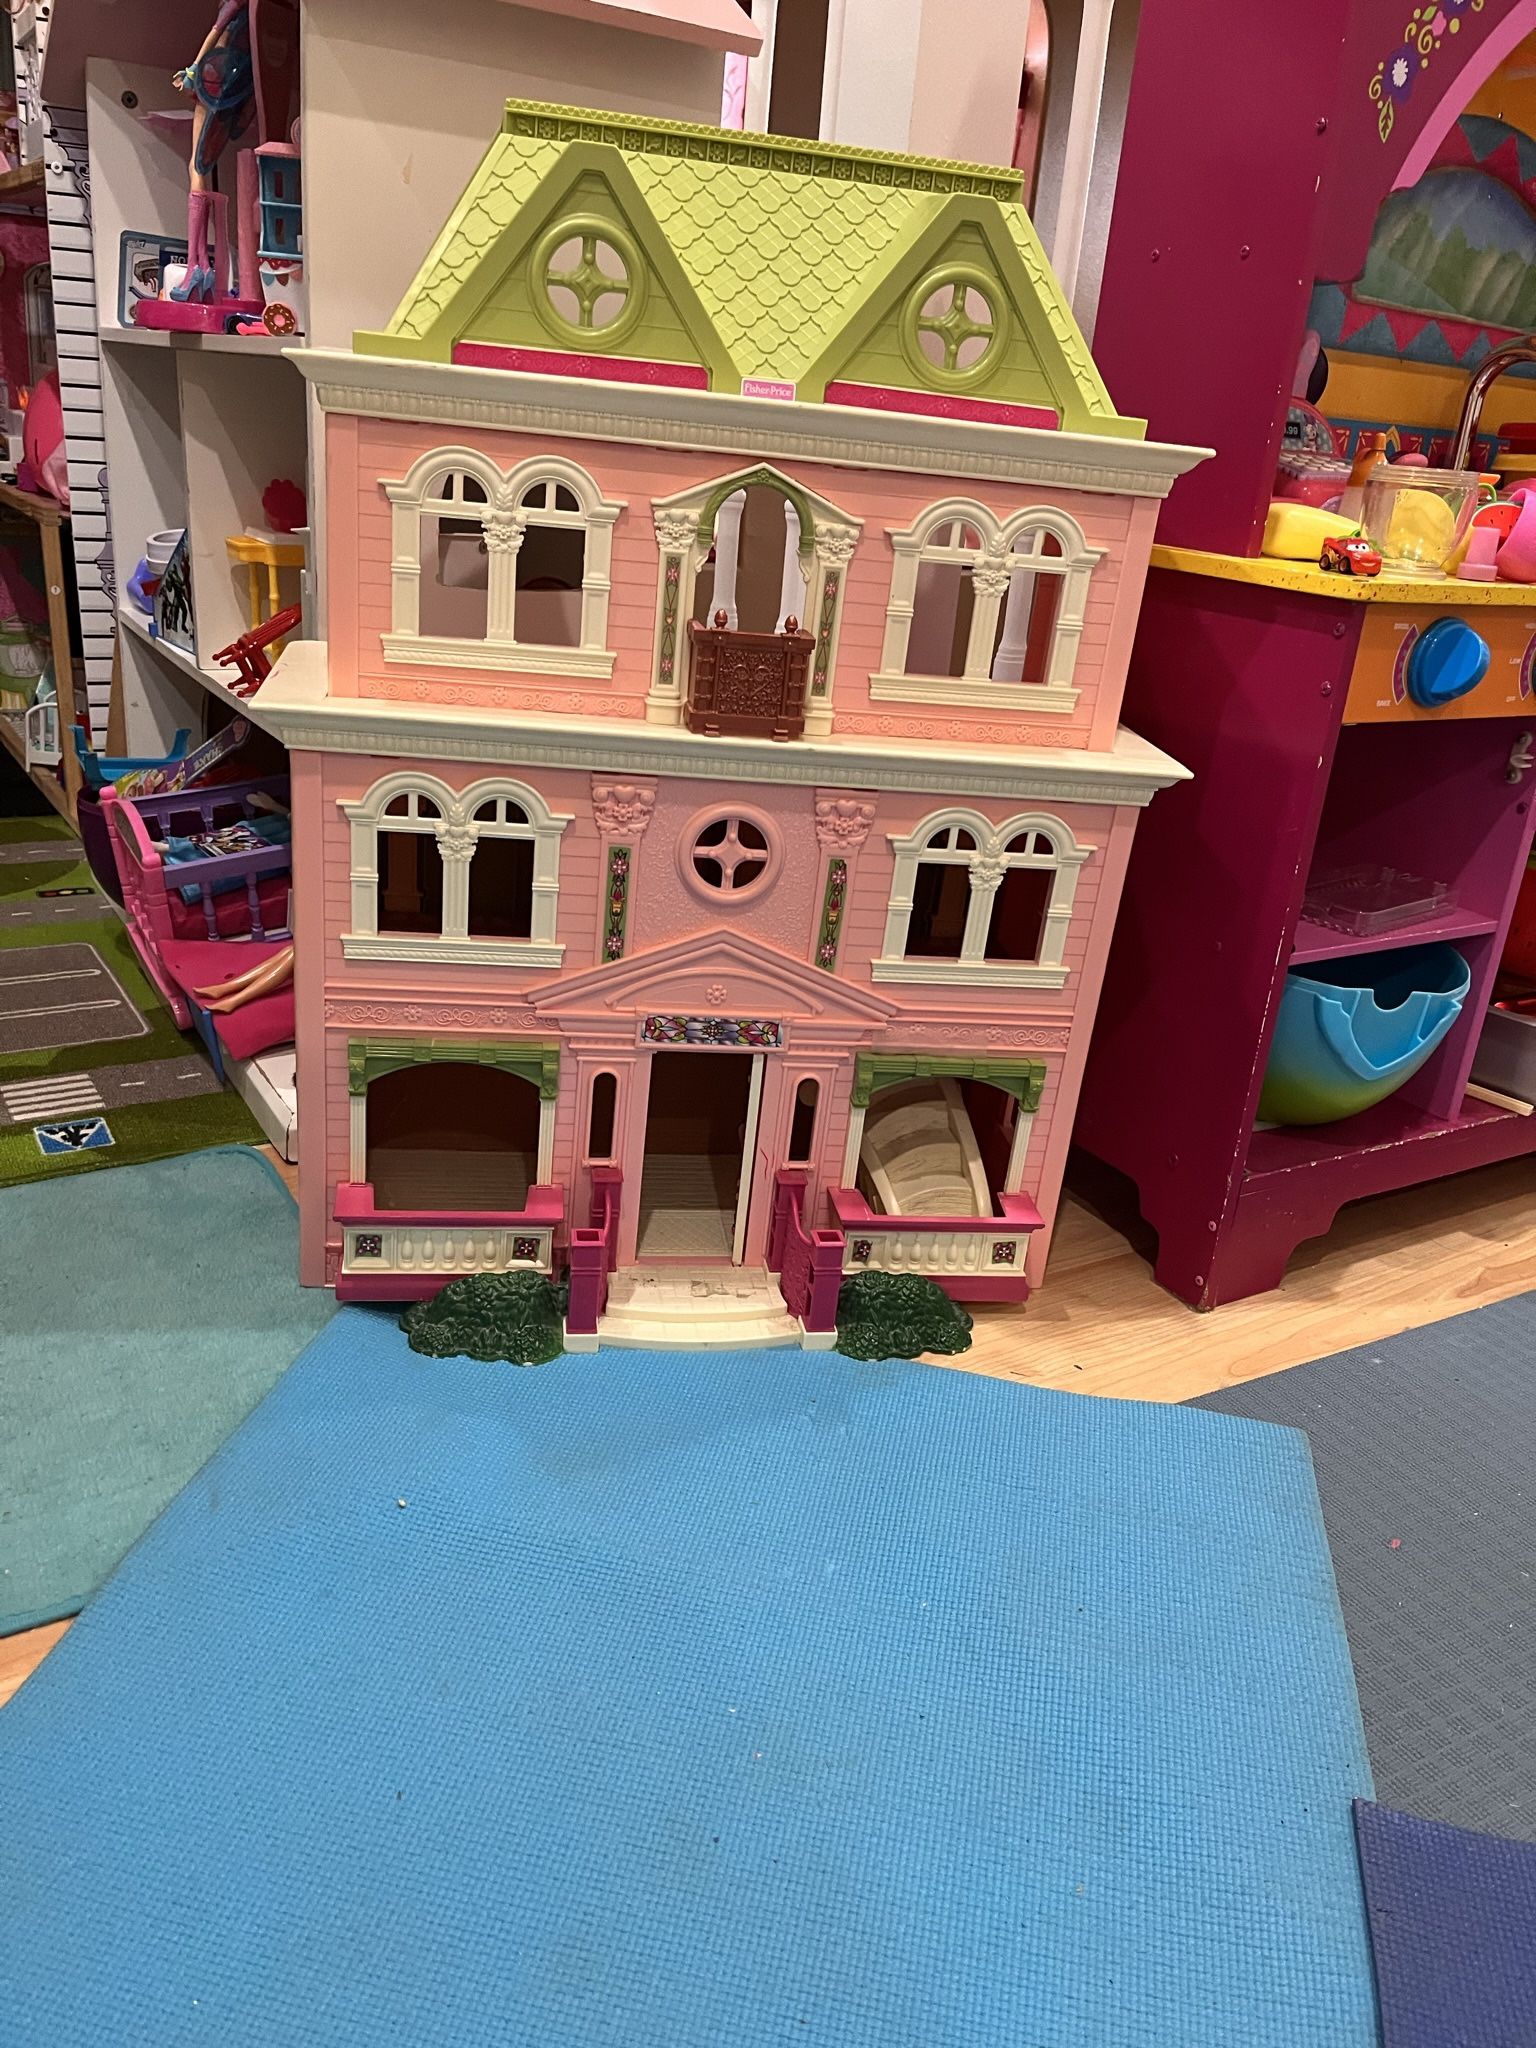 Play Houses For Dolls  